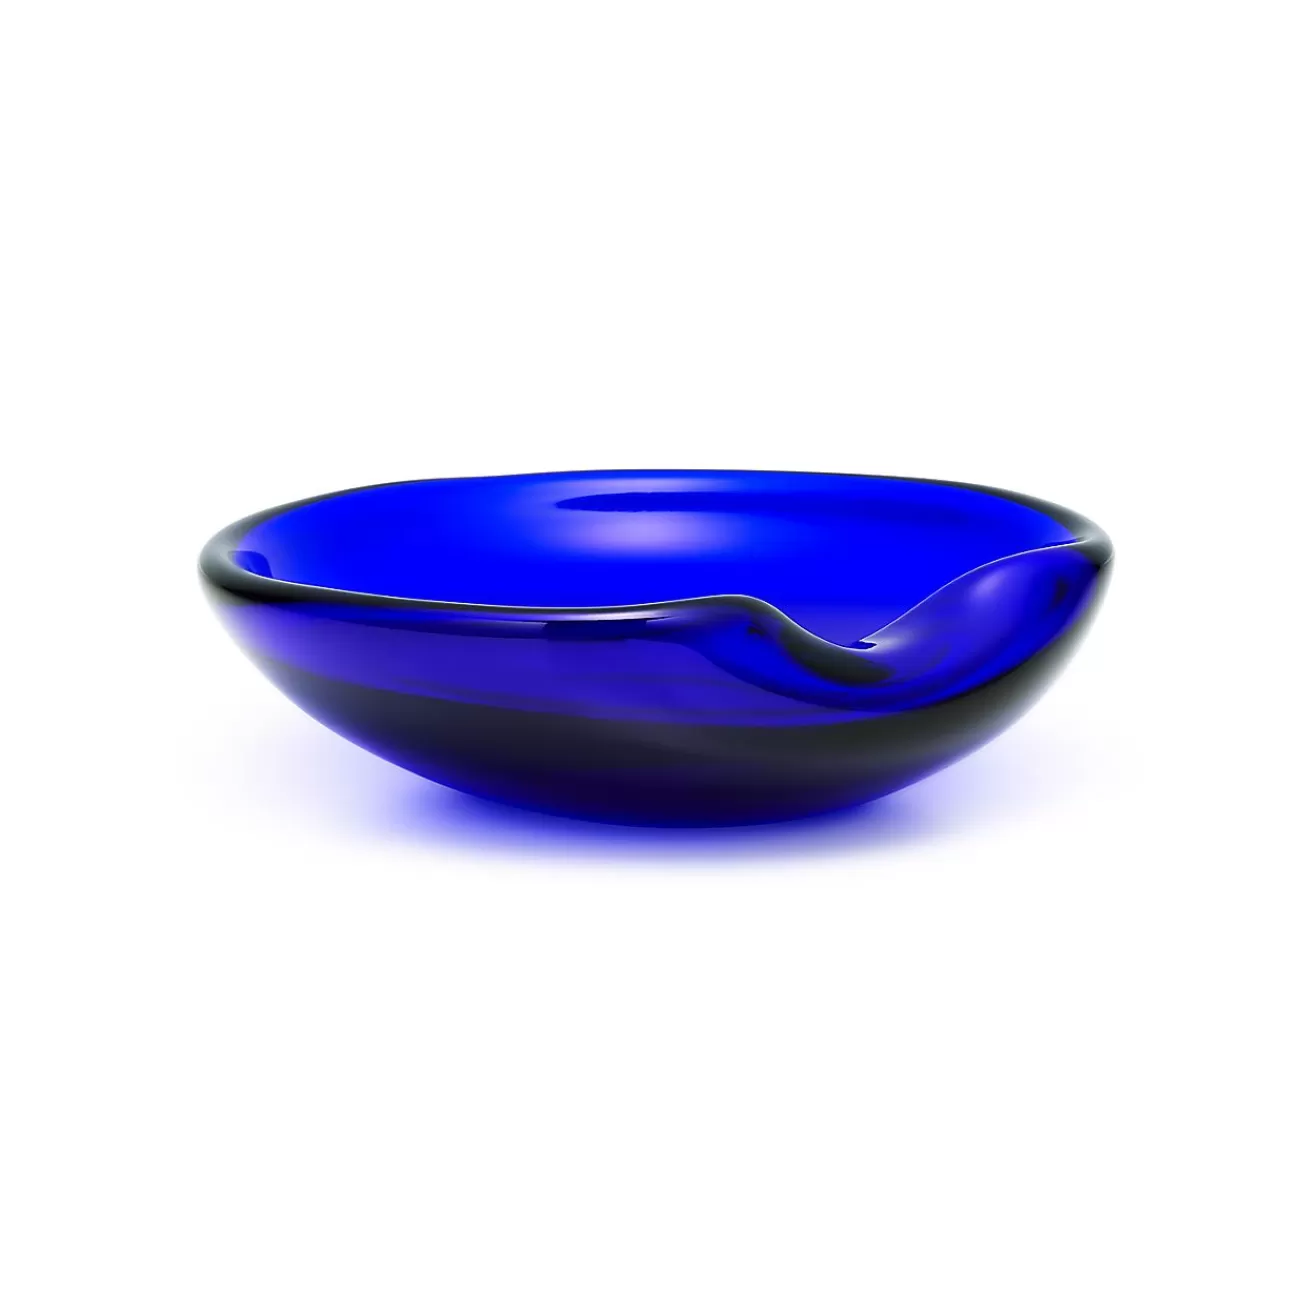 Tiffany & Co. Elsa Peretti® Thumbprint dish in cobalt Venetian glass. More sizes available. | ^ The Home | Housewarming Gifts